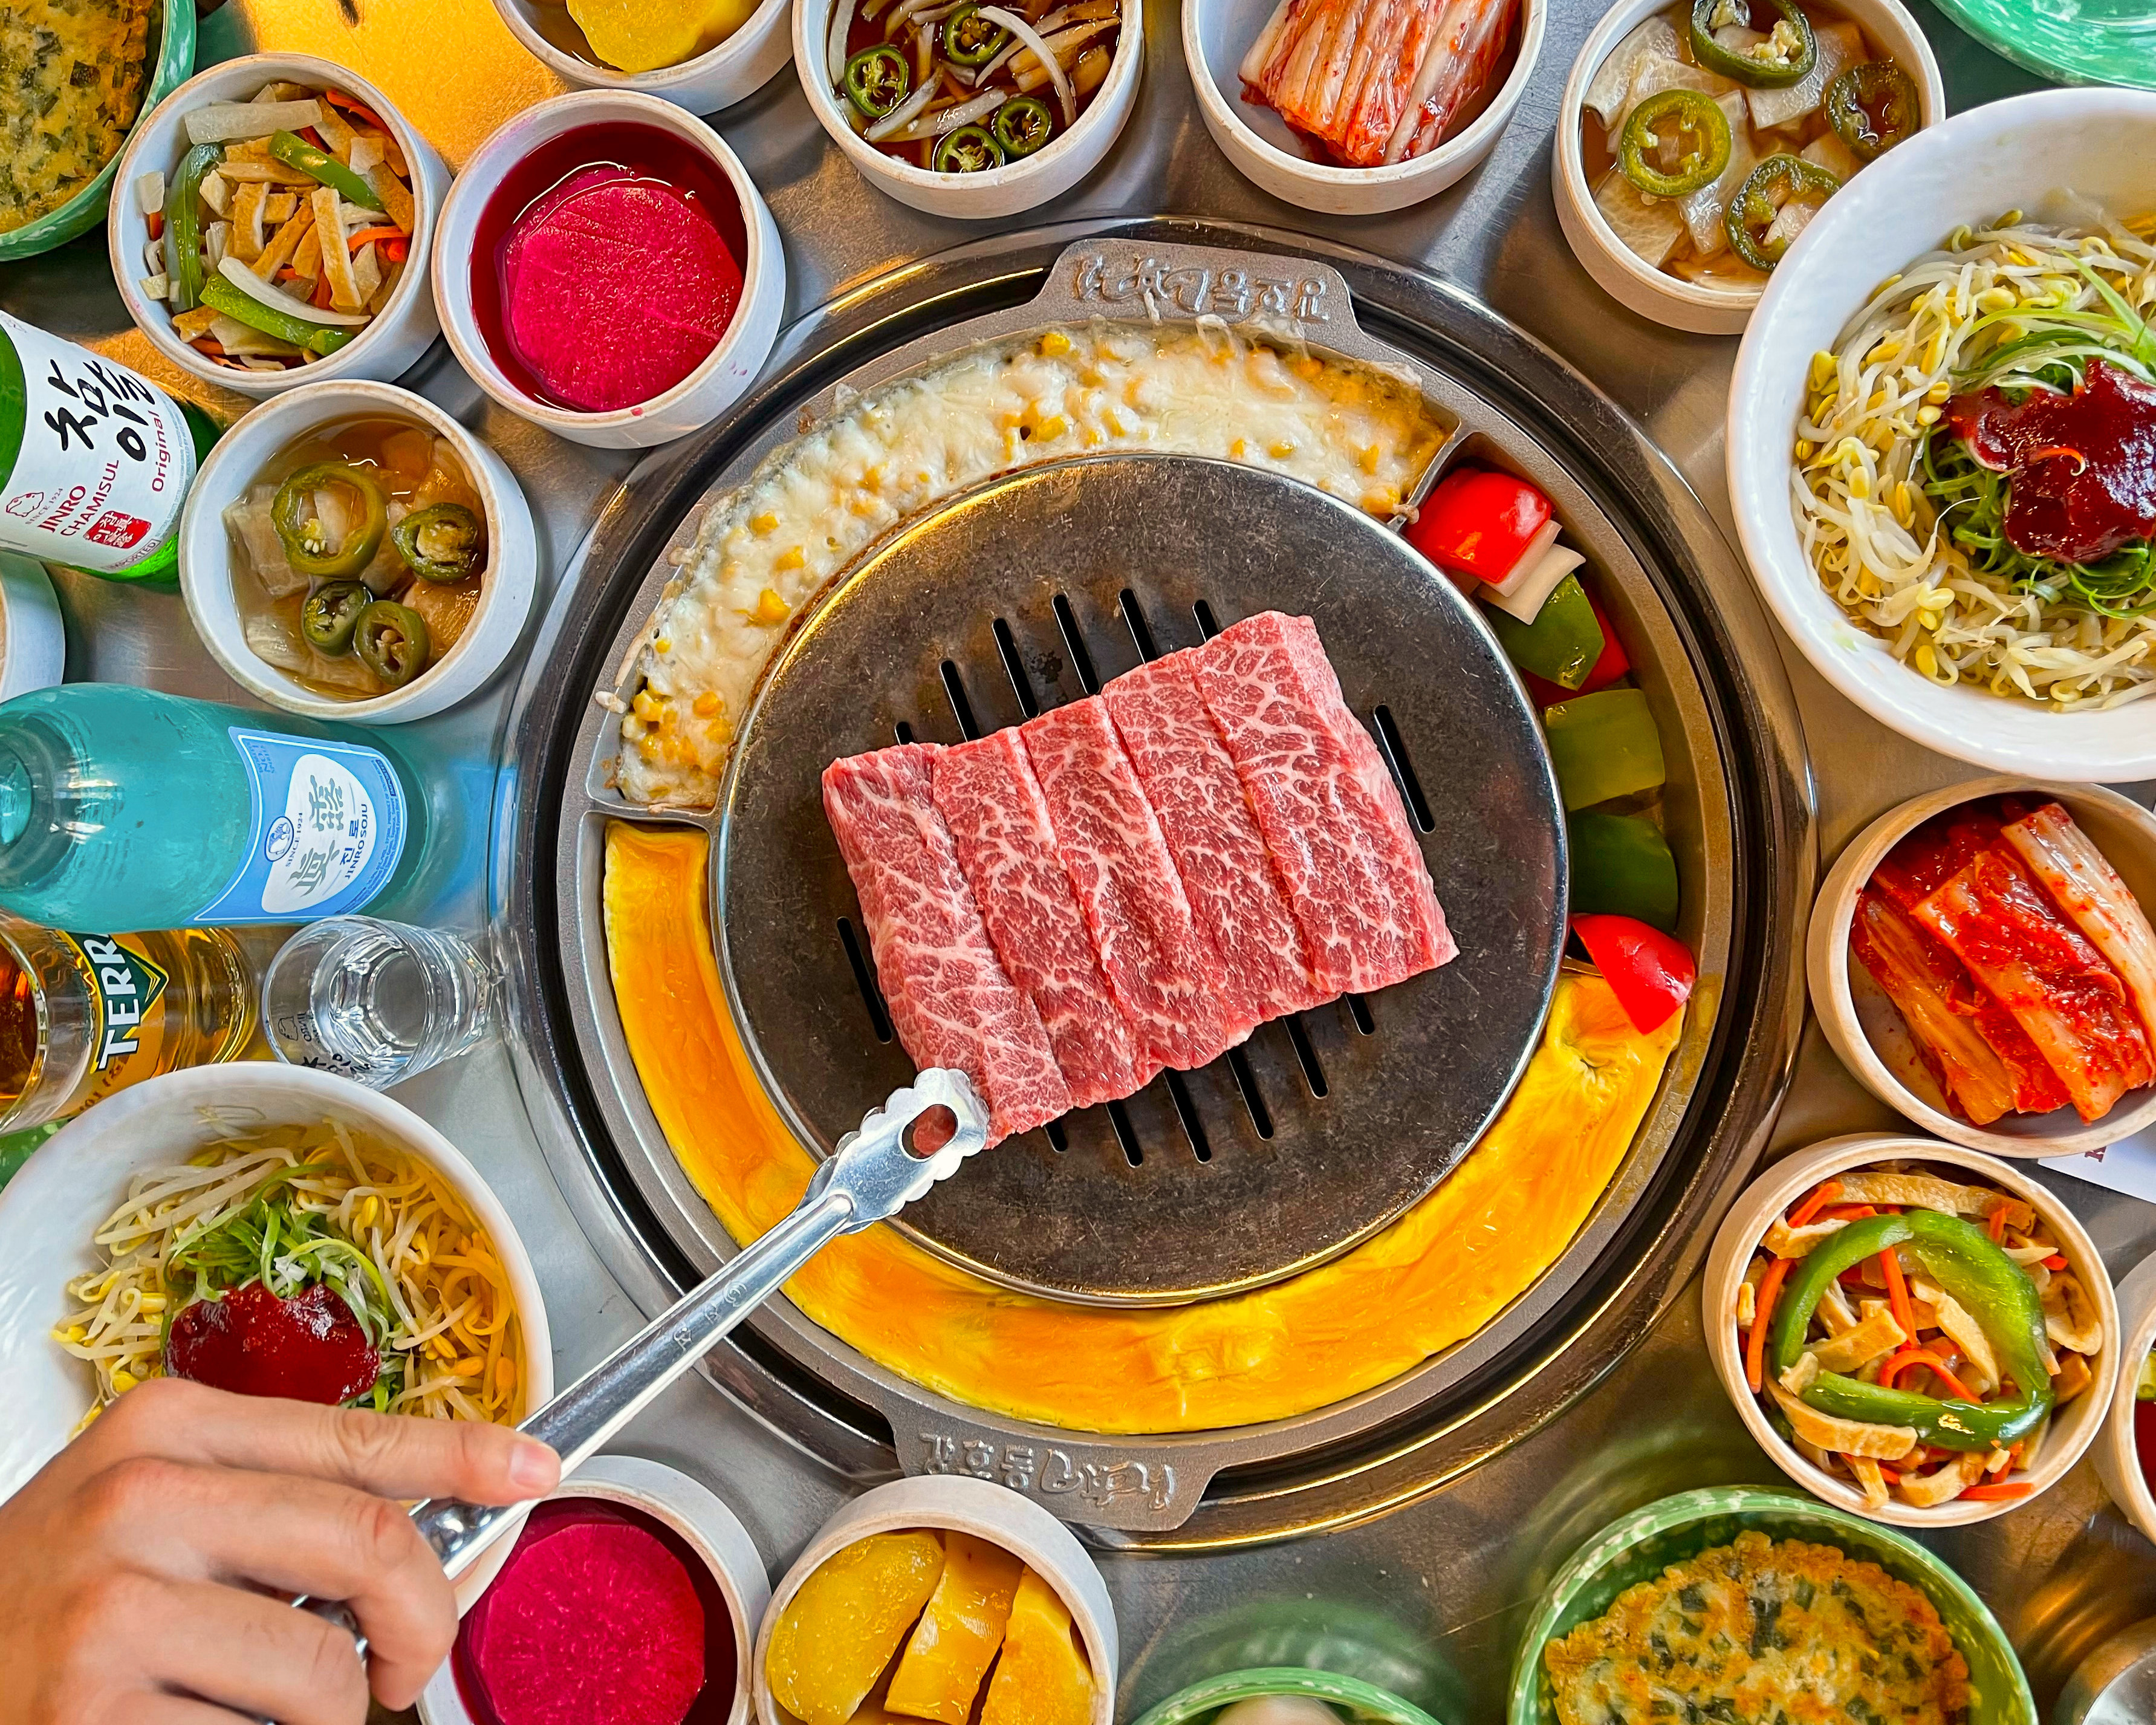 A cut of marbled beef on a grill, delicately handled with tongs. Around the grill are side dishes with sauces, pickled vegetables, and noodles.